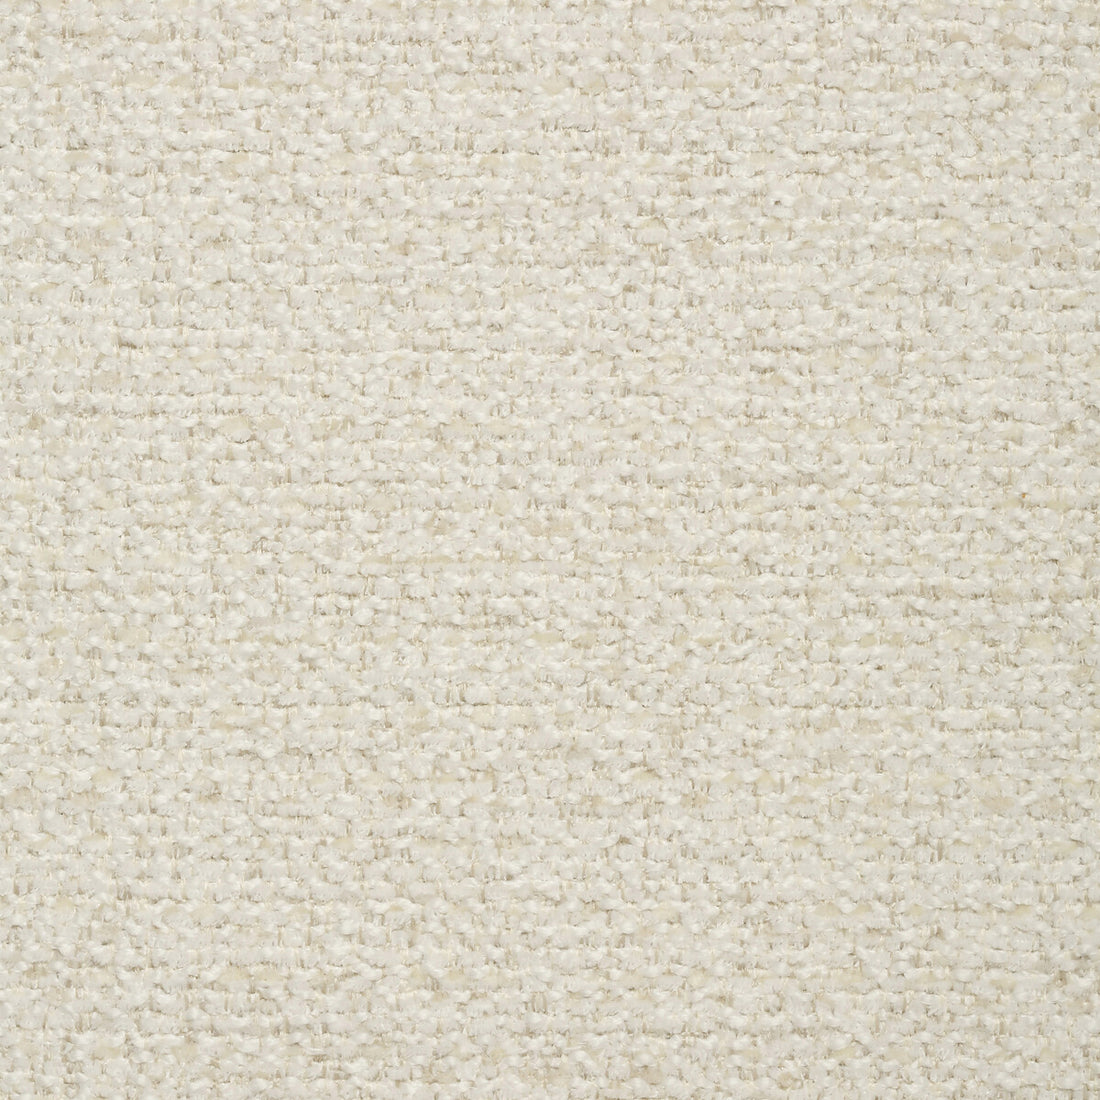 Kravet Contract fabric in 35118-111 color - pattern 35118.111.0 - by Kravet Contract in the Crypton Incase collection